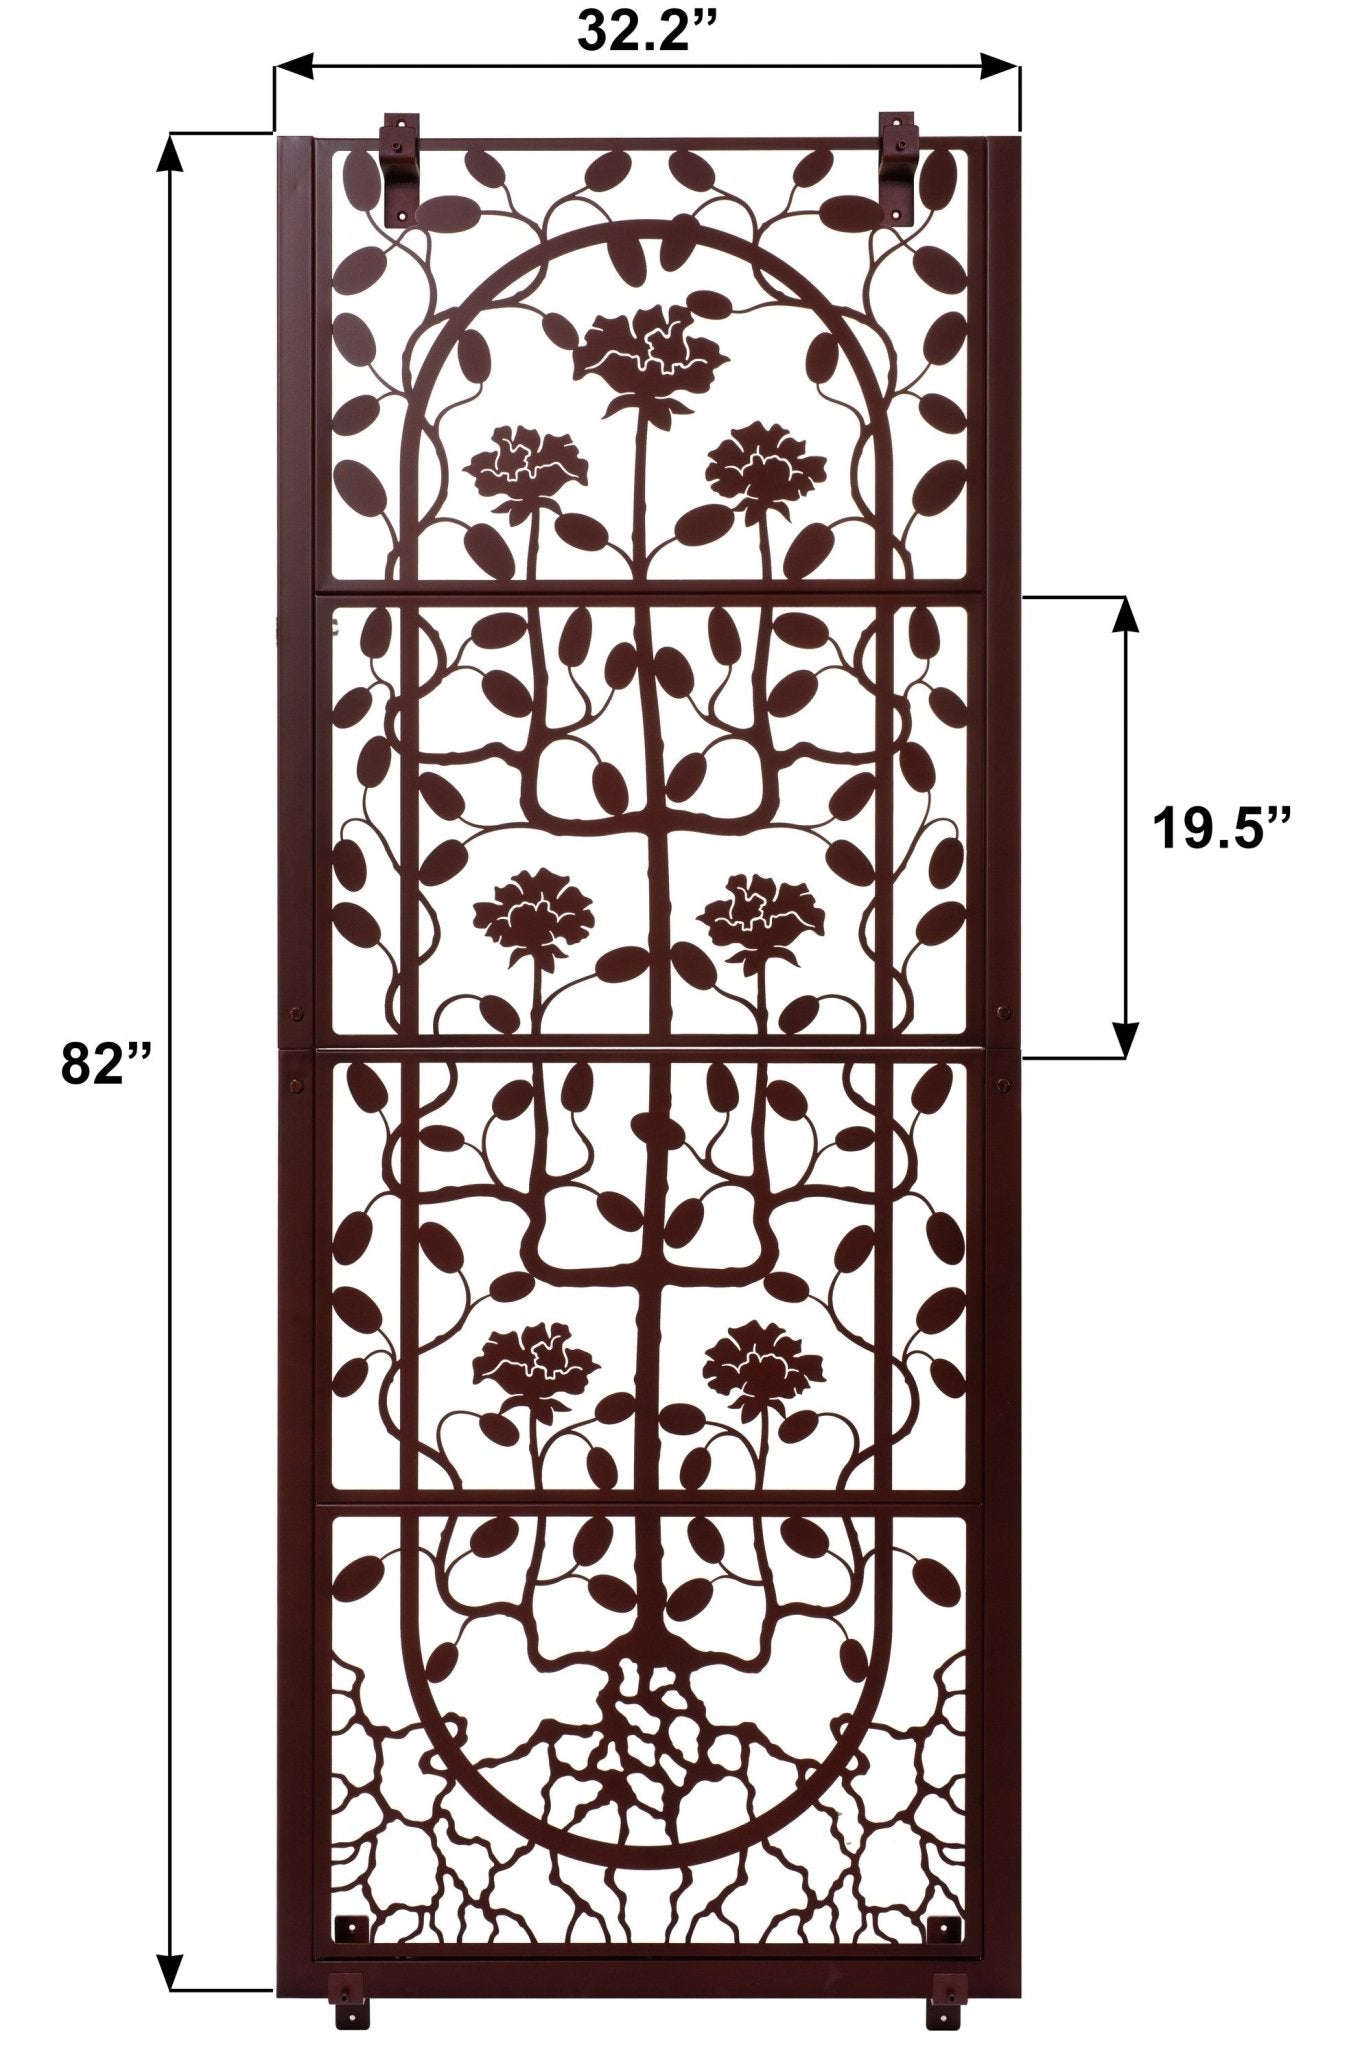 H Potter Wall Trellis Decorative Privacy Screen for Climbing Plants â Outdoor/Indoor Metal Art Pane